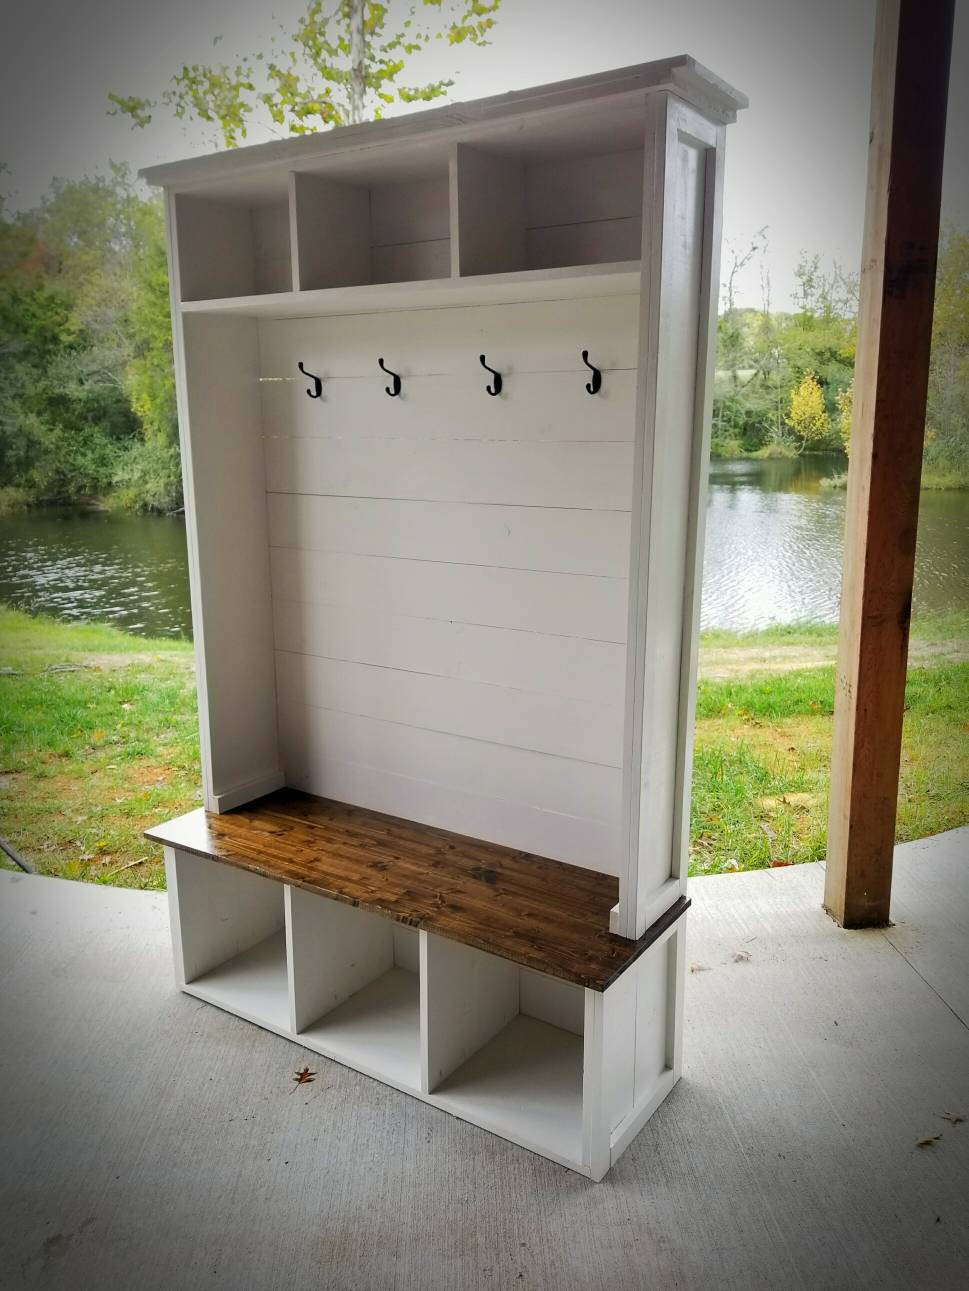 Diy Hall Tree Storage Bench
 Hall Tree with Bench and storage Low Shipping Farmhouse